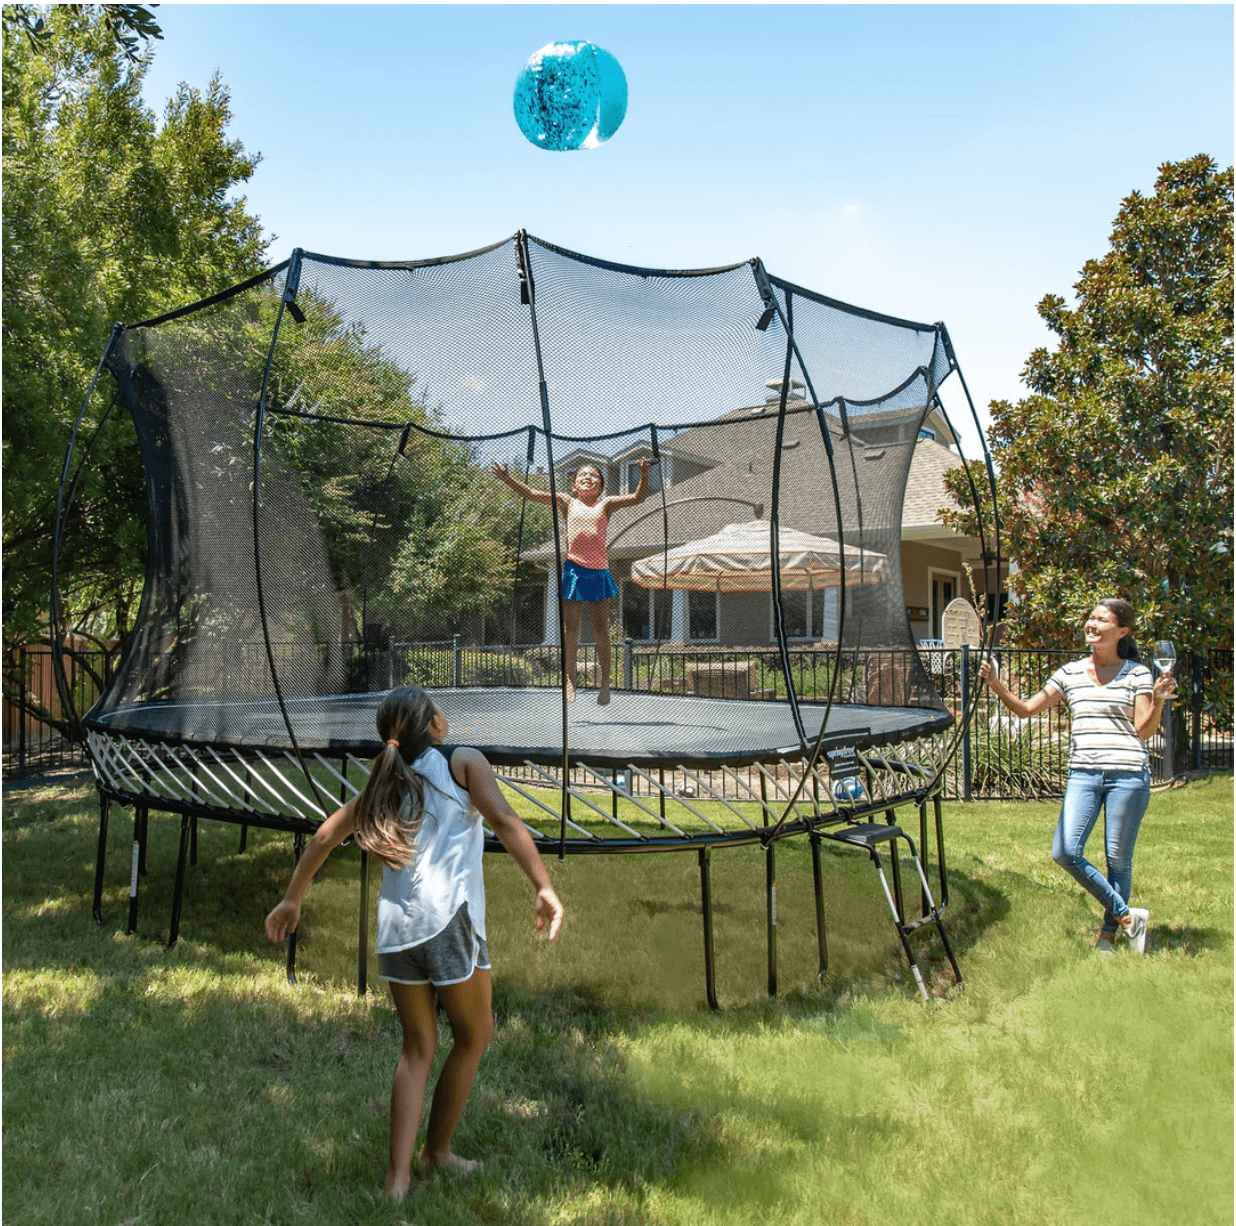 A family playing and jumping on a trampoline.